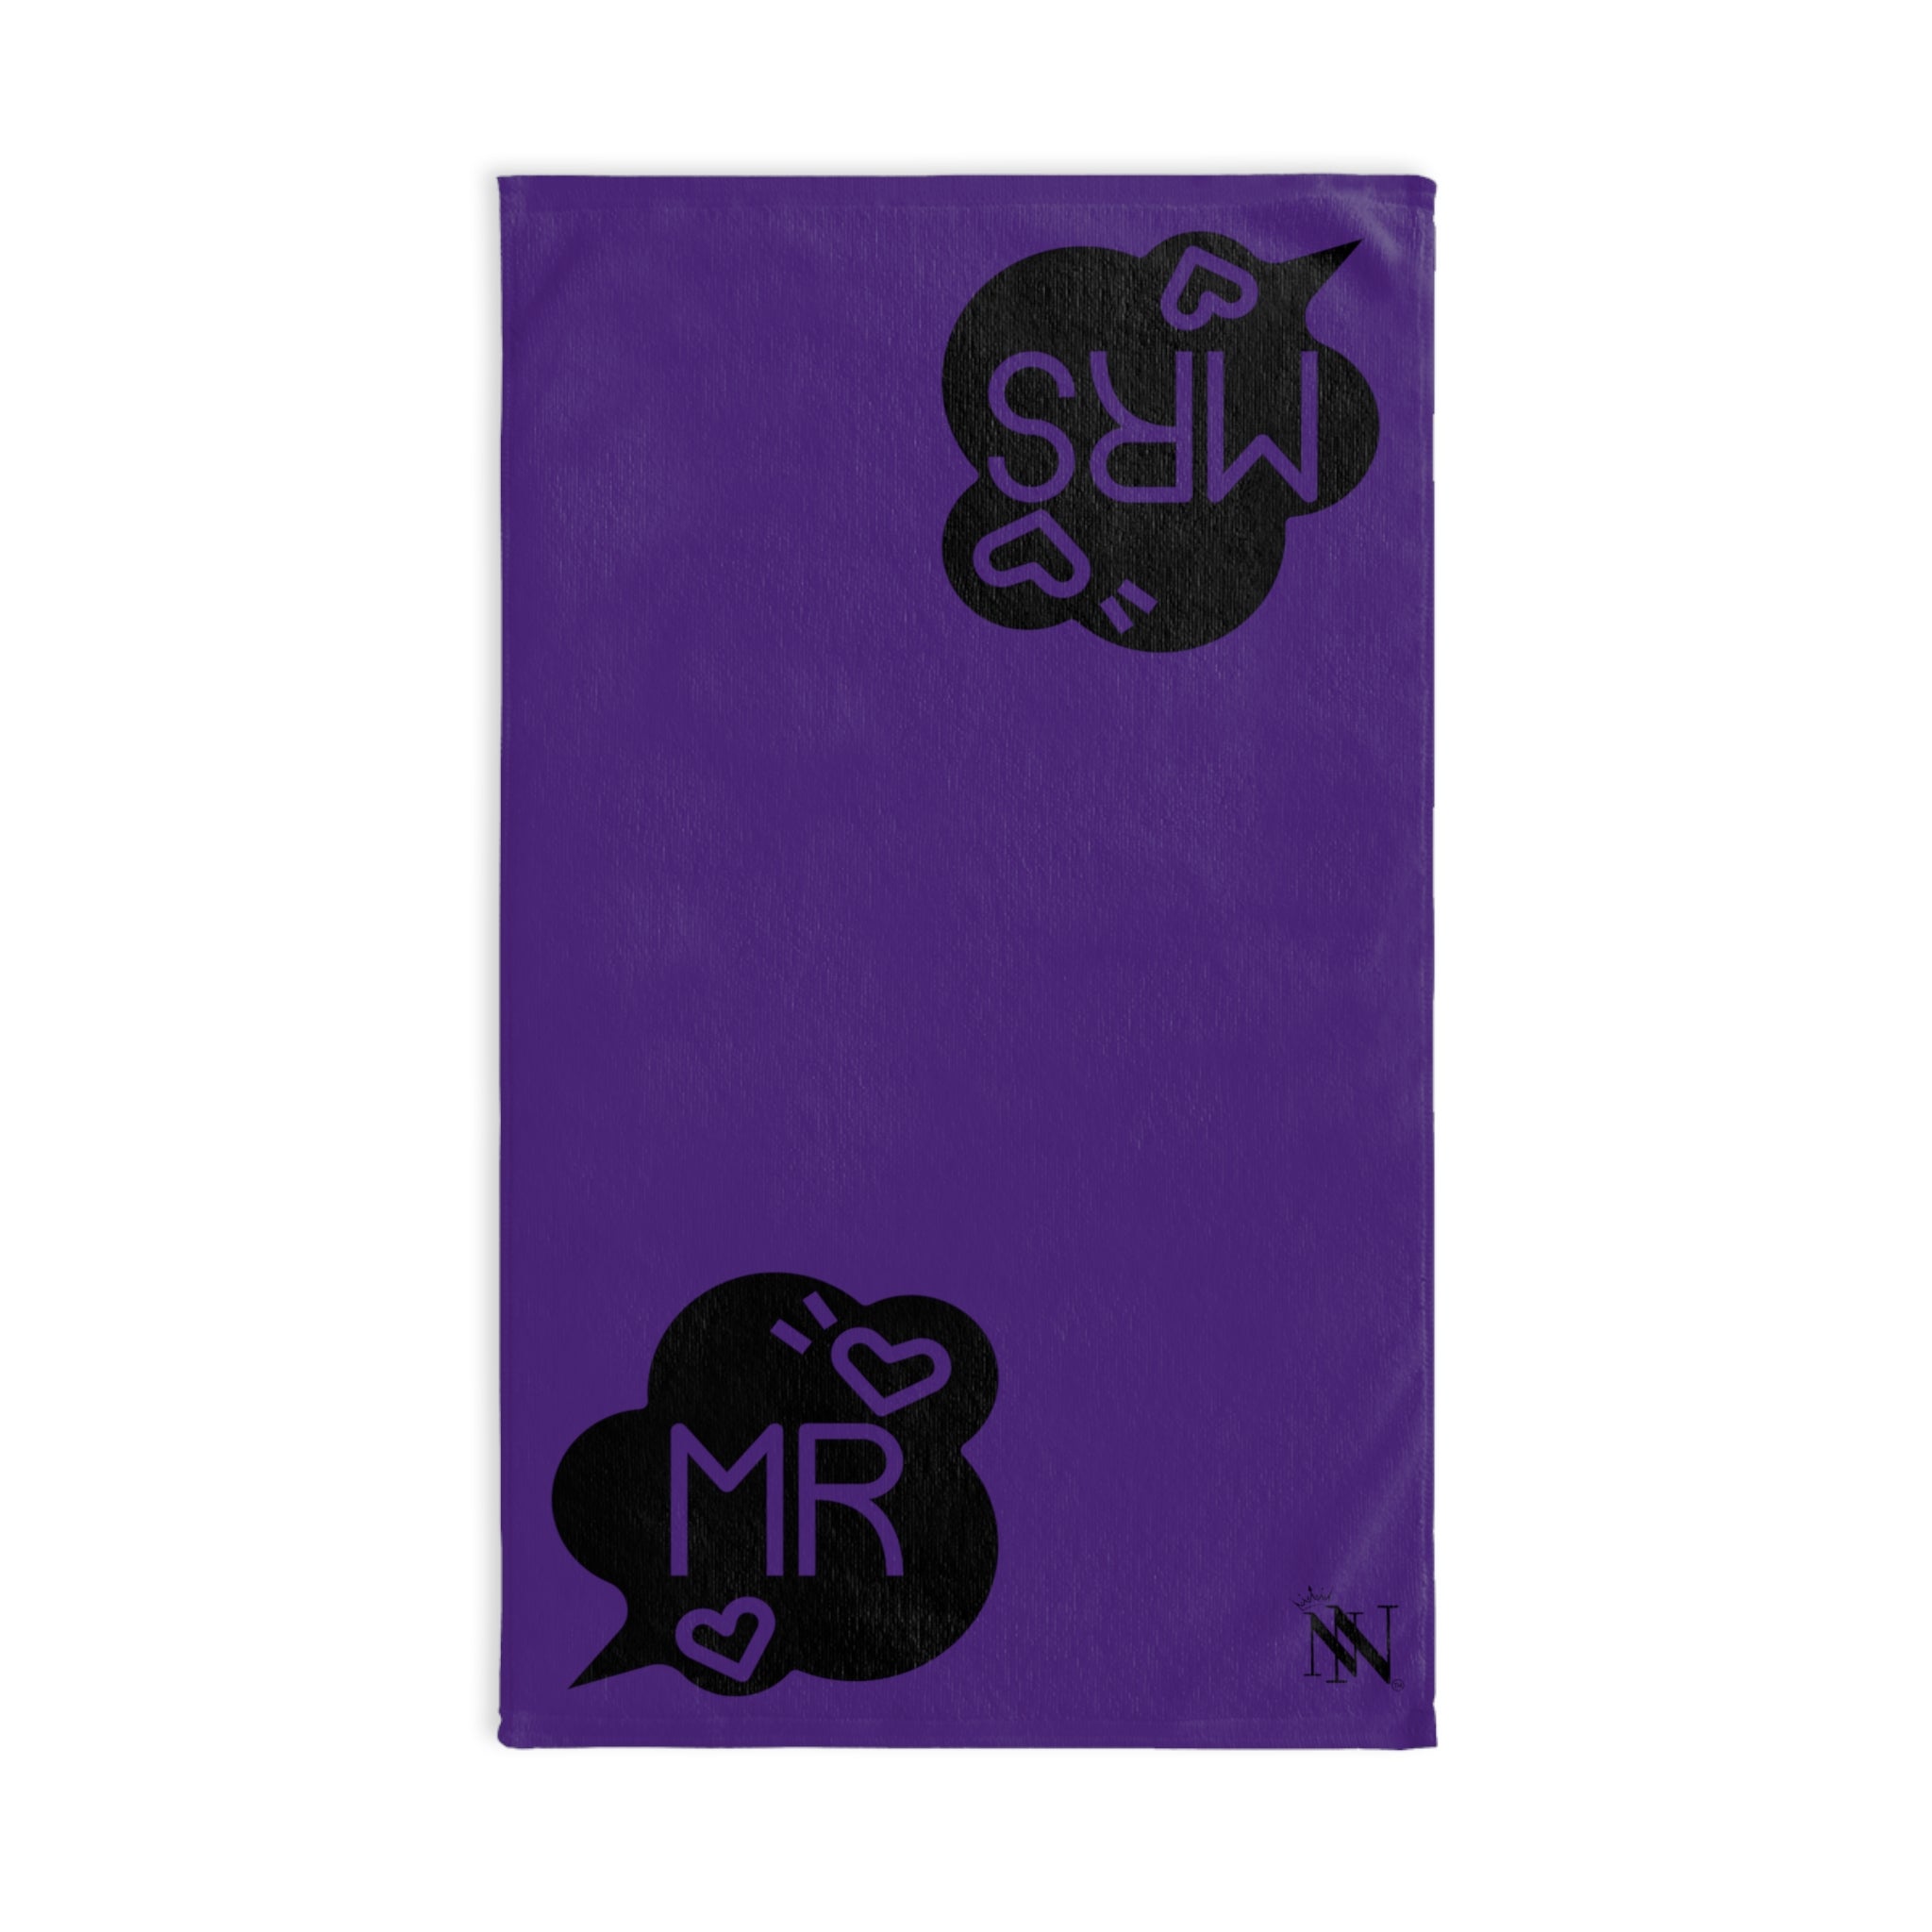 Mr Mrs Bubble Purple | Funny Gifts for Men - Gifts for Him - Birthday Gifts for Men, Him, Husband, Boyfriend, New Couple Gifts, Fathers & Valentines Day Gifts, Christmas Gifts NECTAR NAPKINS